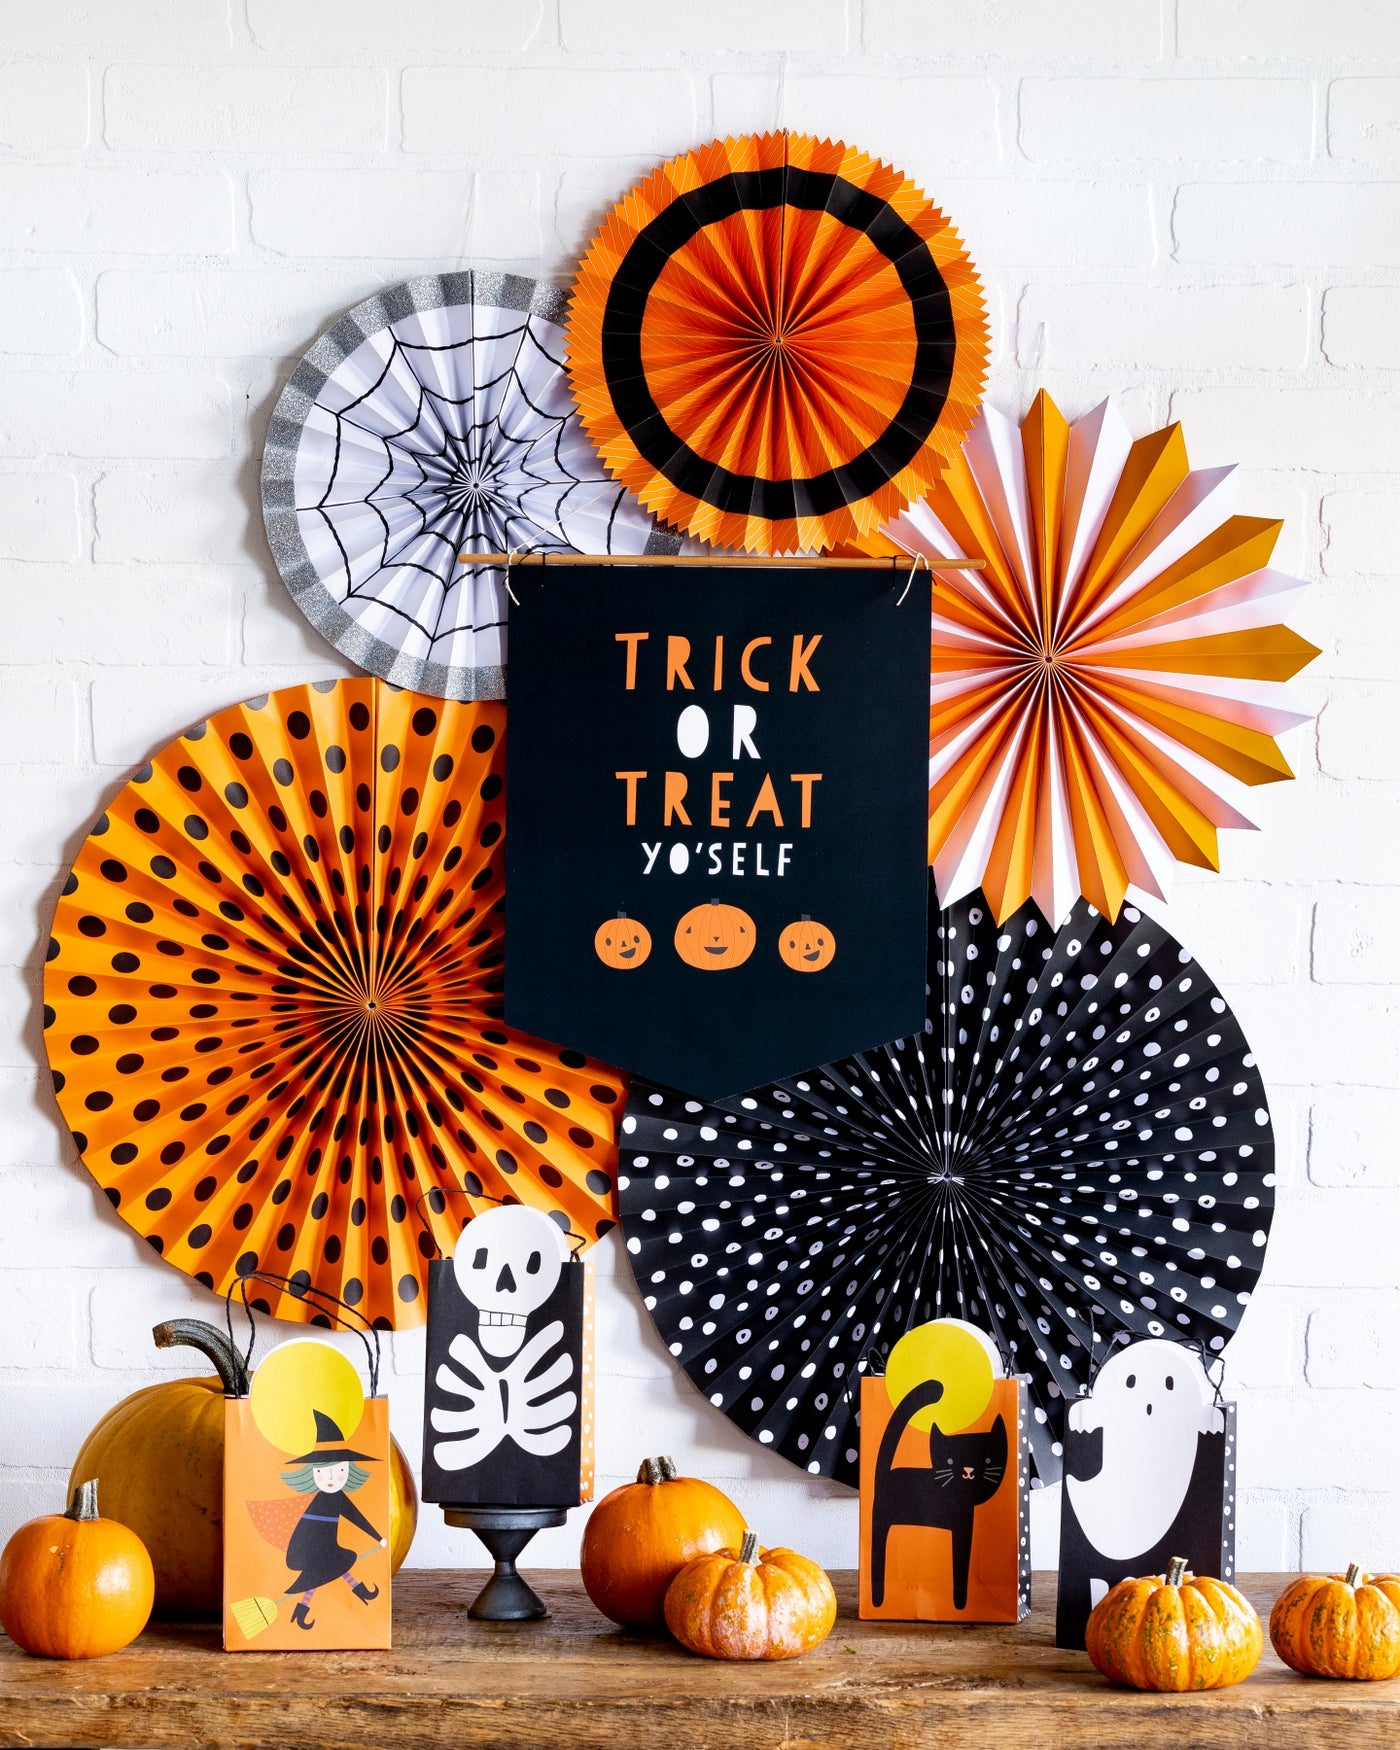 Trick or Treat Poster